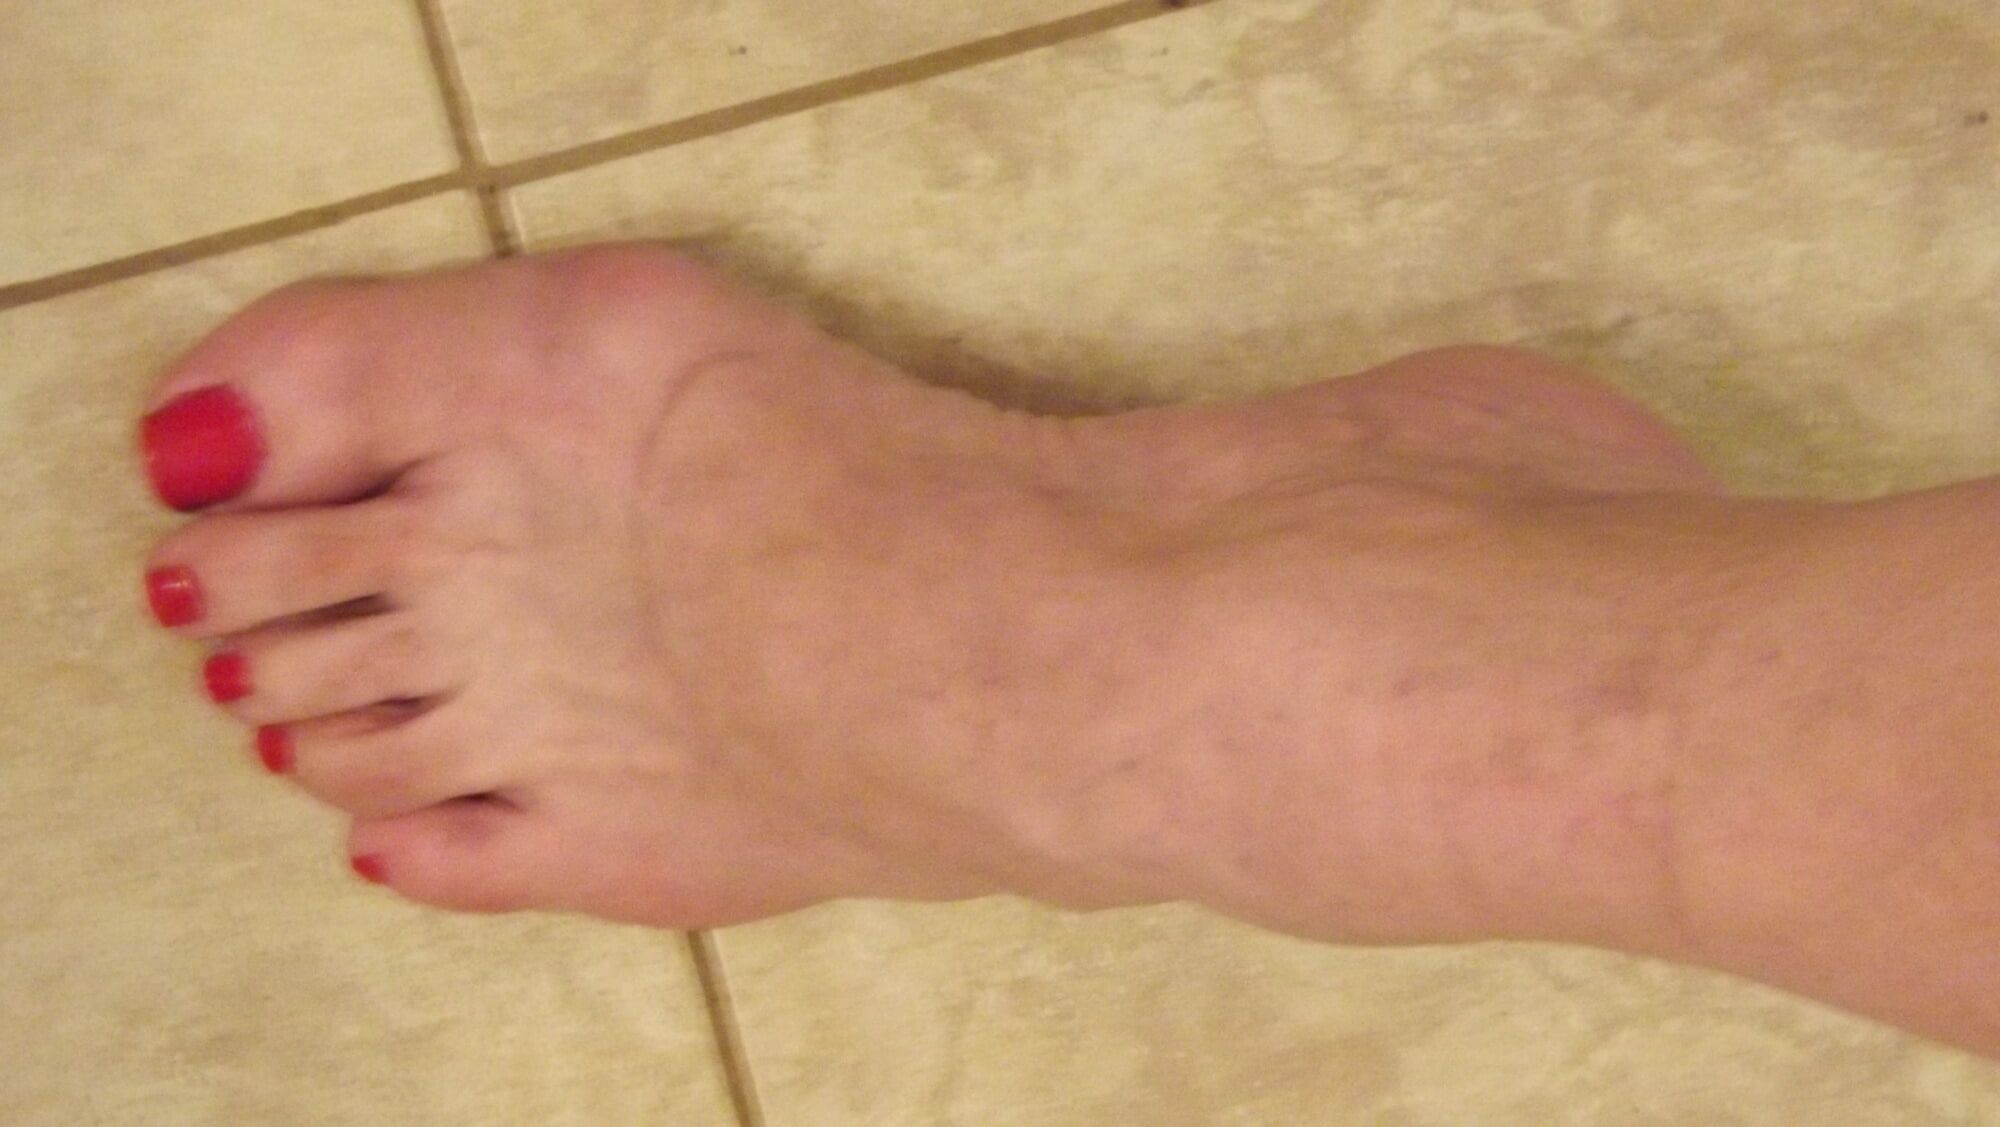 new pics of some man toes #2